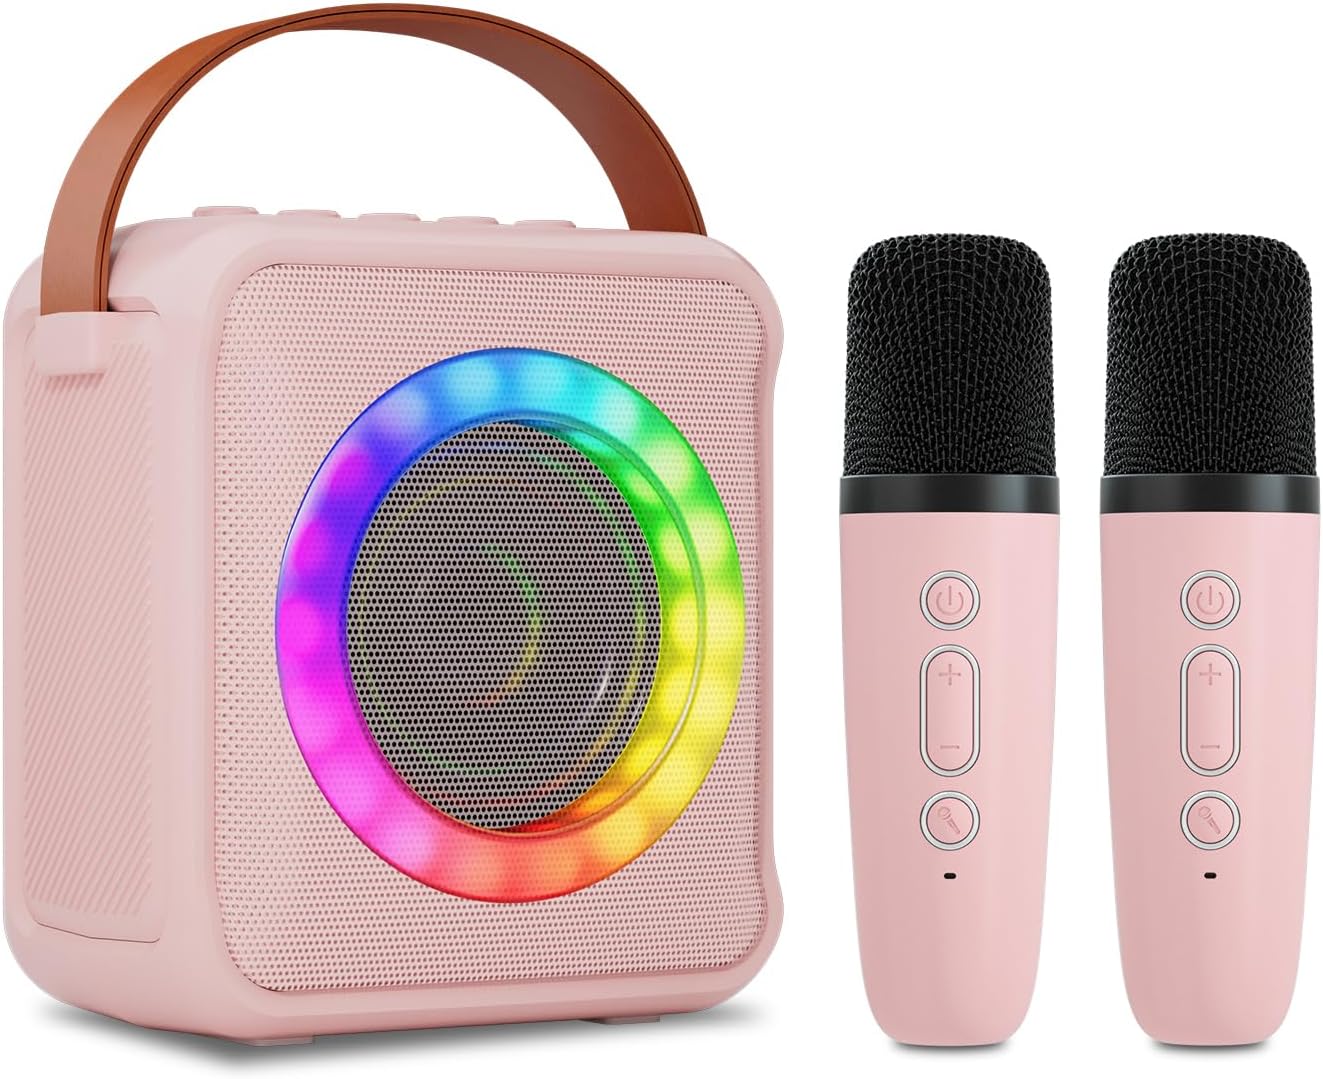 Mini Karaoke Machine for Kids Adults, Portable Bluetooth Speaker with 2 Wireless Microphones, Microphone Speaker Set with LED Disco Lights for Home Party, Birthday Gifts for Girls Boys Kid(Pink)